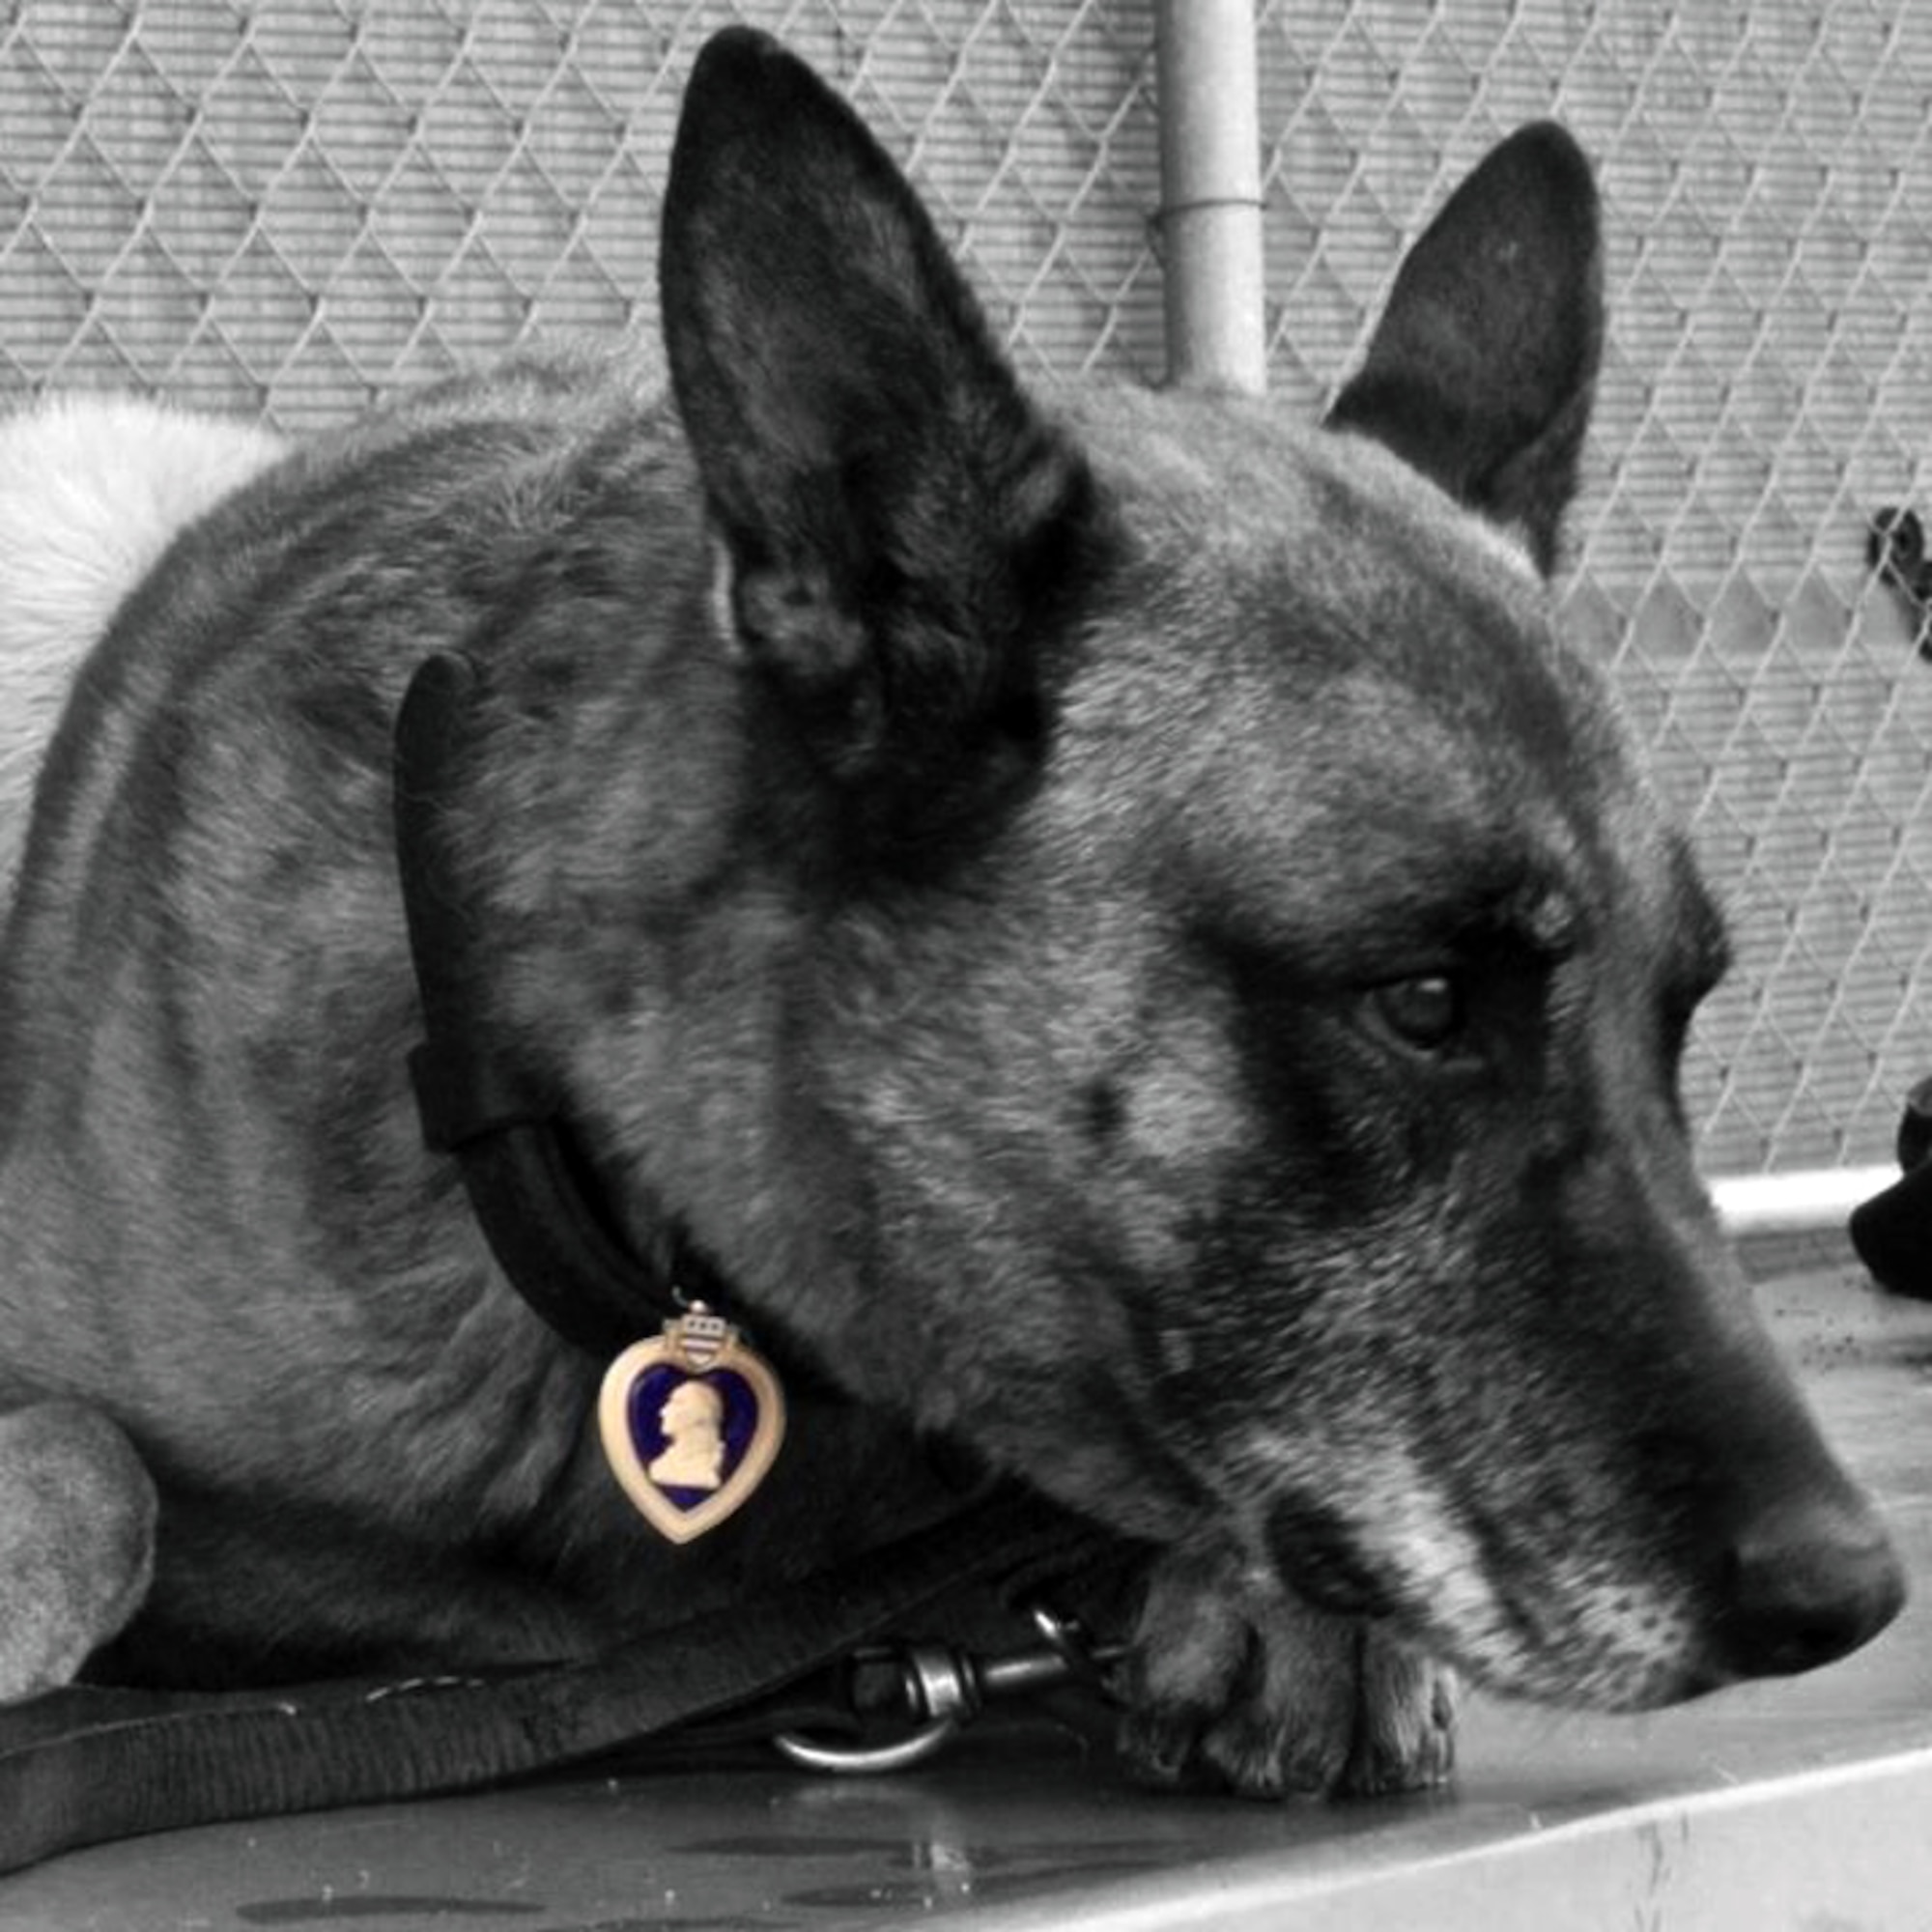 Navy Petty Officer 1st Class Valdo, working dog, wears a Purple Heart Medal on his collar. Valdo and his handler, Petty Officer 2nd Class Ryan Lee, were both wounded by shrapnel in a rocket propelled grenade attach in Bala Murghab District, Badghis Province, Afghanistan, April 4, 2011. Valdo fully recovered after five surgeries, served another year, and retired with a Purple Heart Medal, and now lives with Lee in New Jersey. (U.S. Air Force photo by Master Sgt. Kevin Wallace/RELEASED)